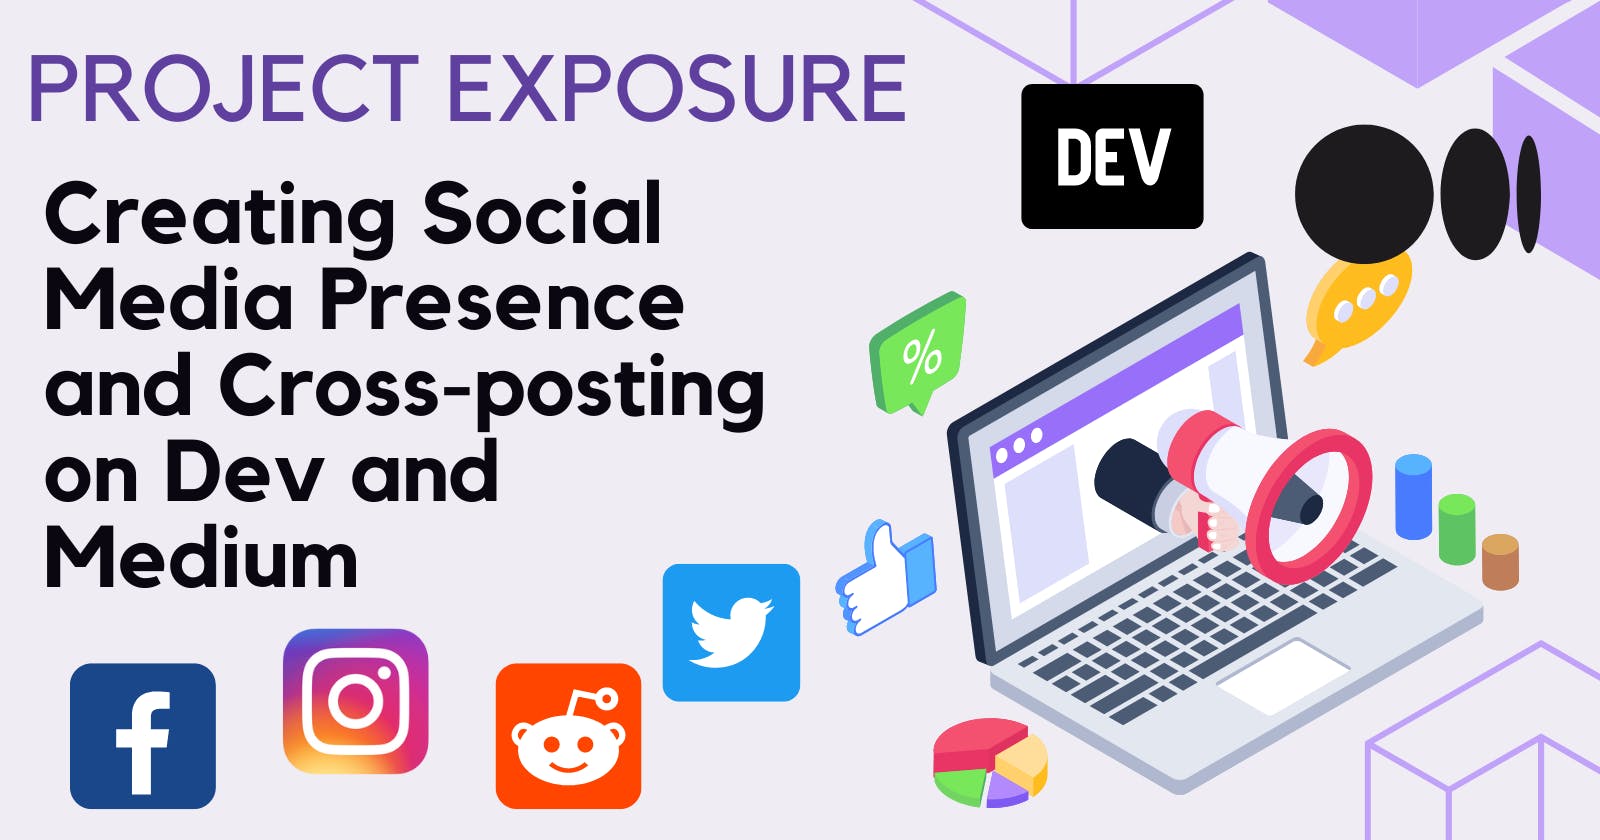 Project Exposure: [1] Creating Social Media Presence and Cross-posting on Dev and Medium